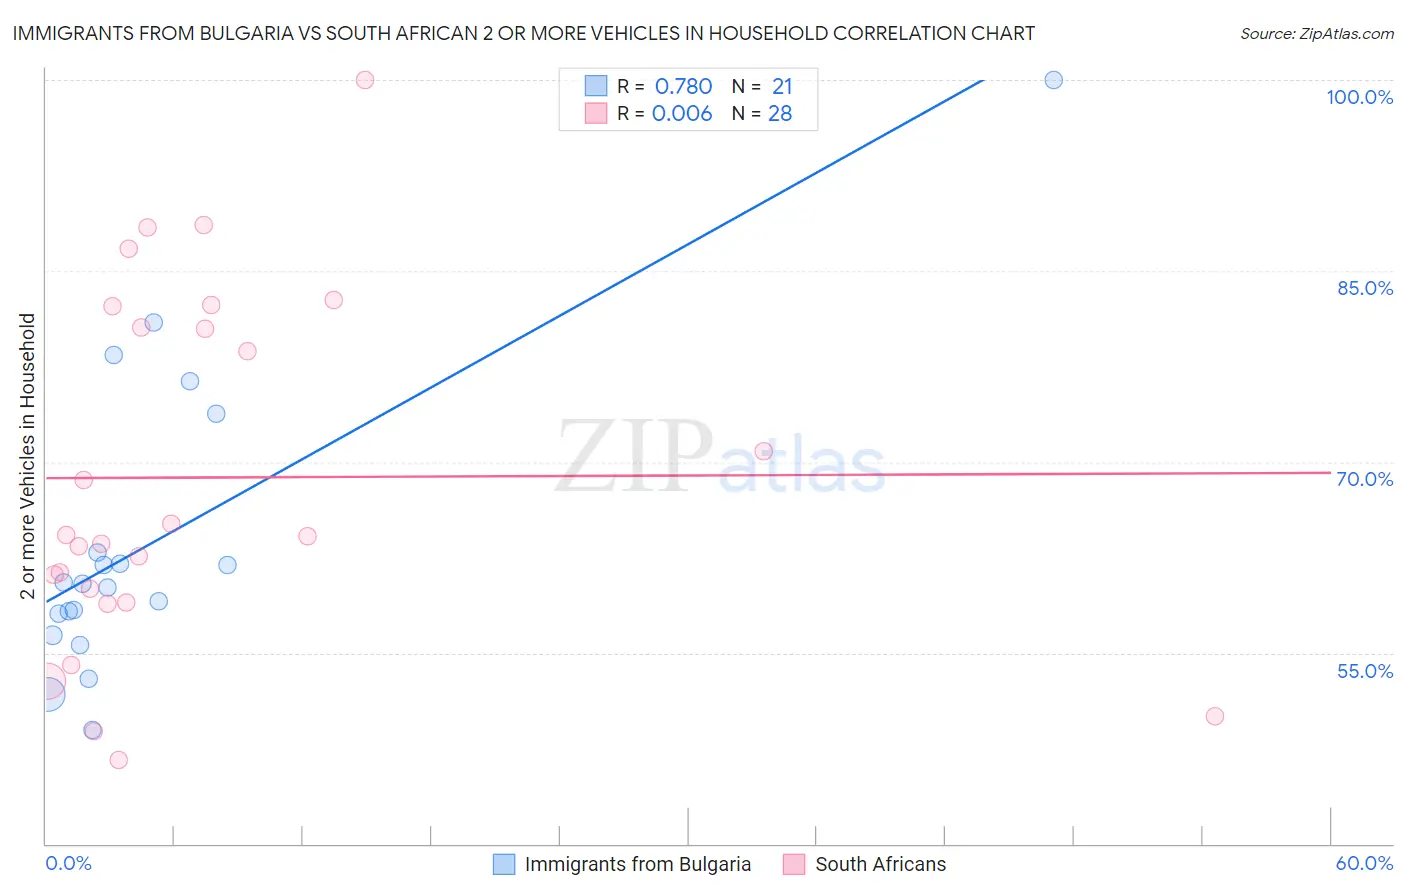 Immigrants from Bulgaria vs South African 2 or more Vehicles in Household